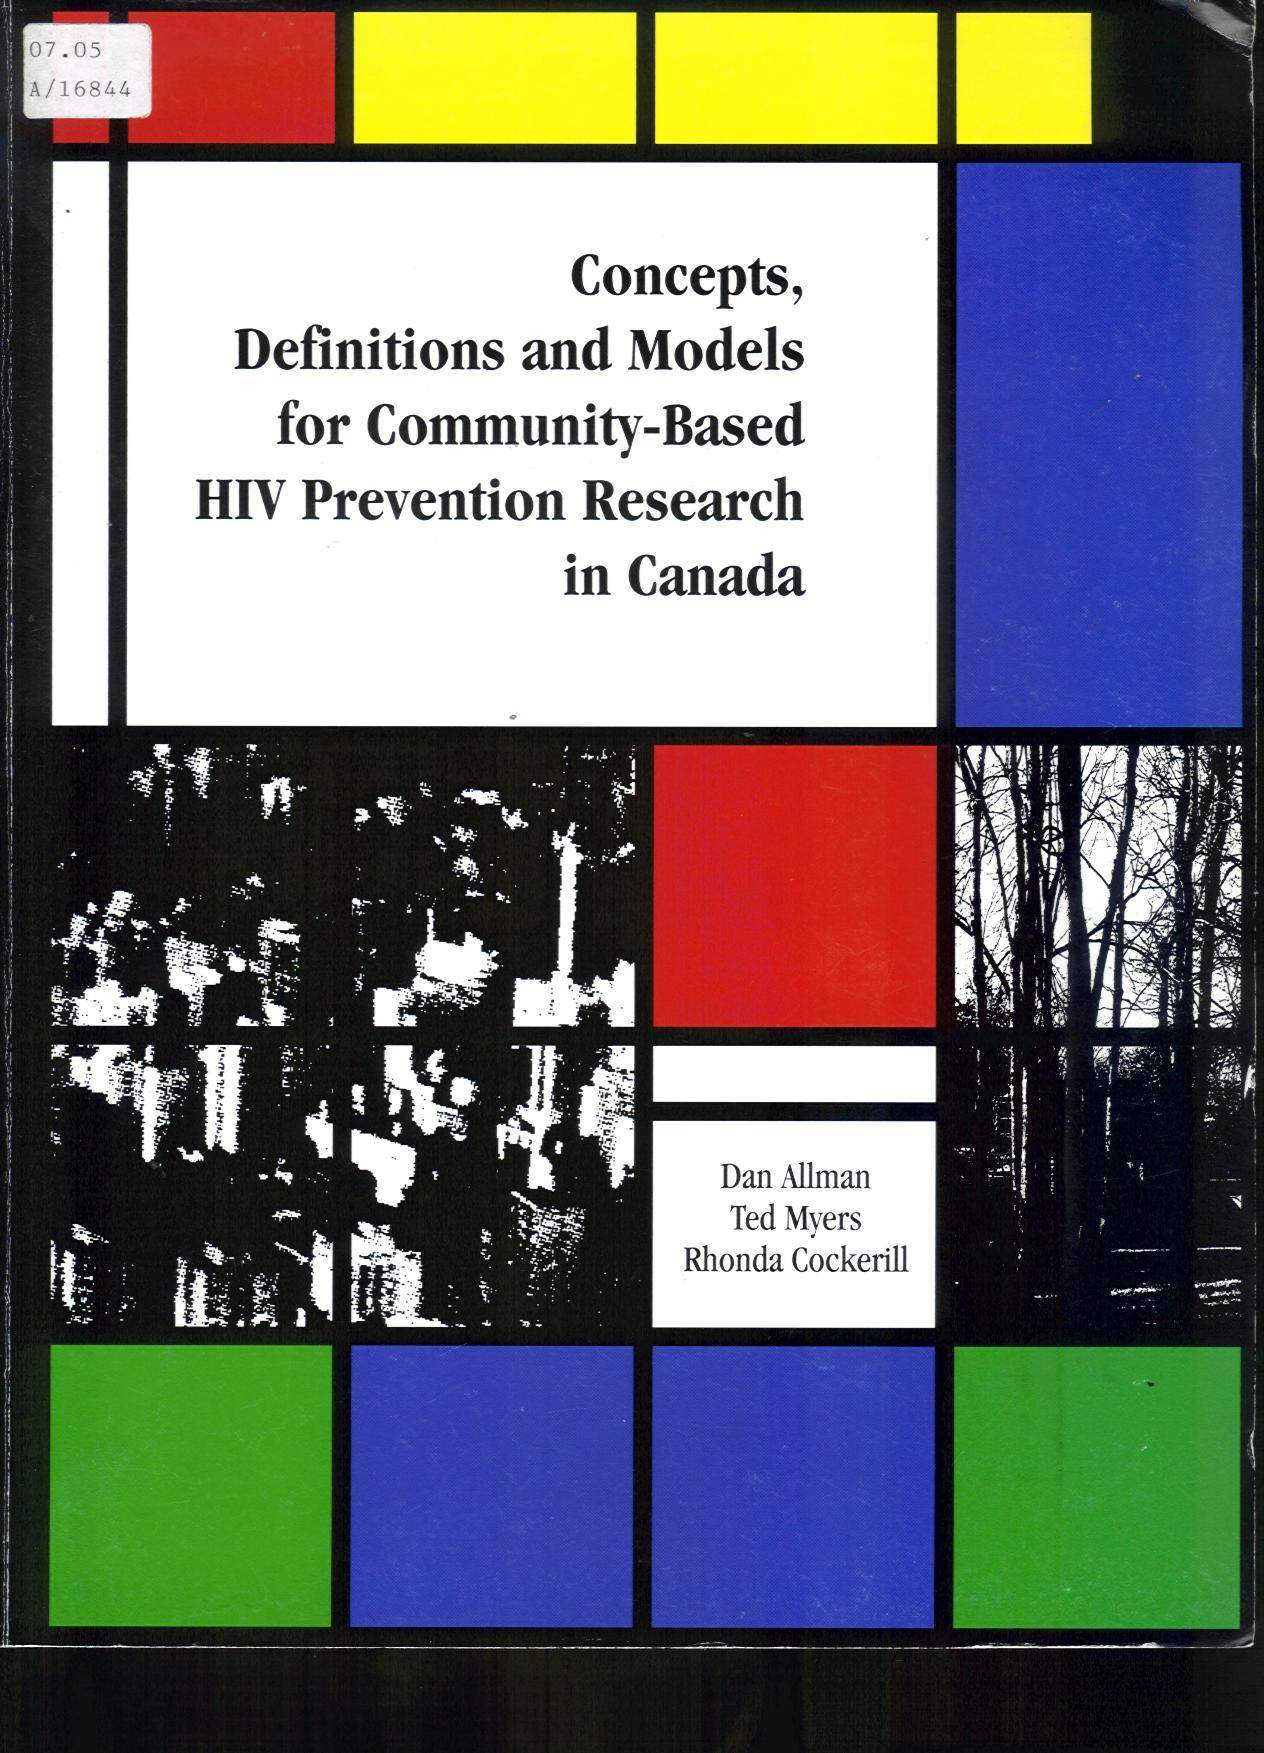 Concepts, Definitions and Models for Community-based HIV Prevention Research in Canada